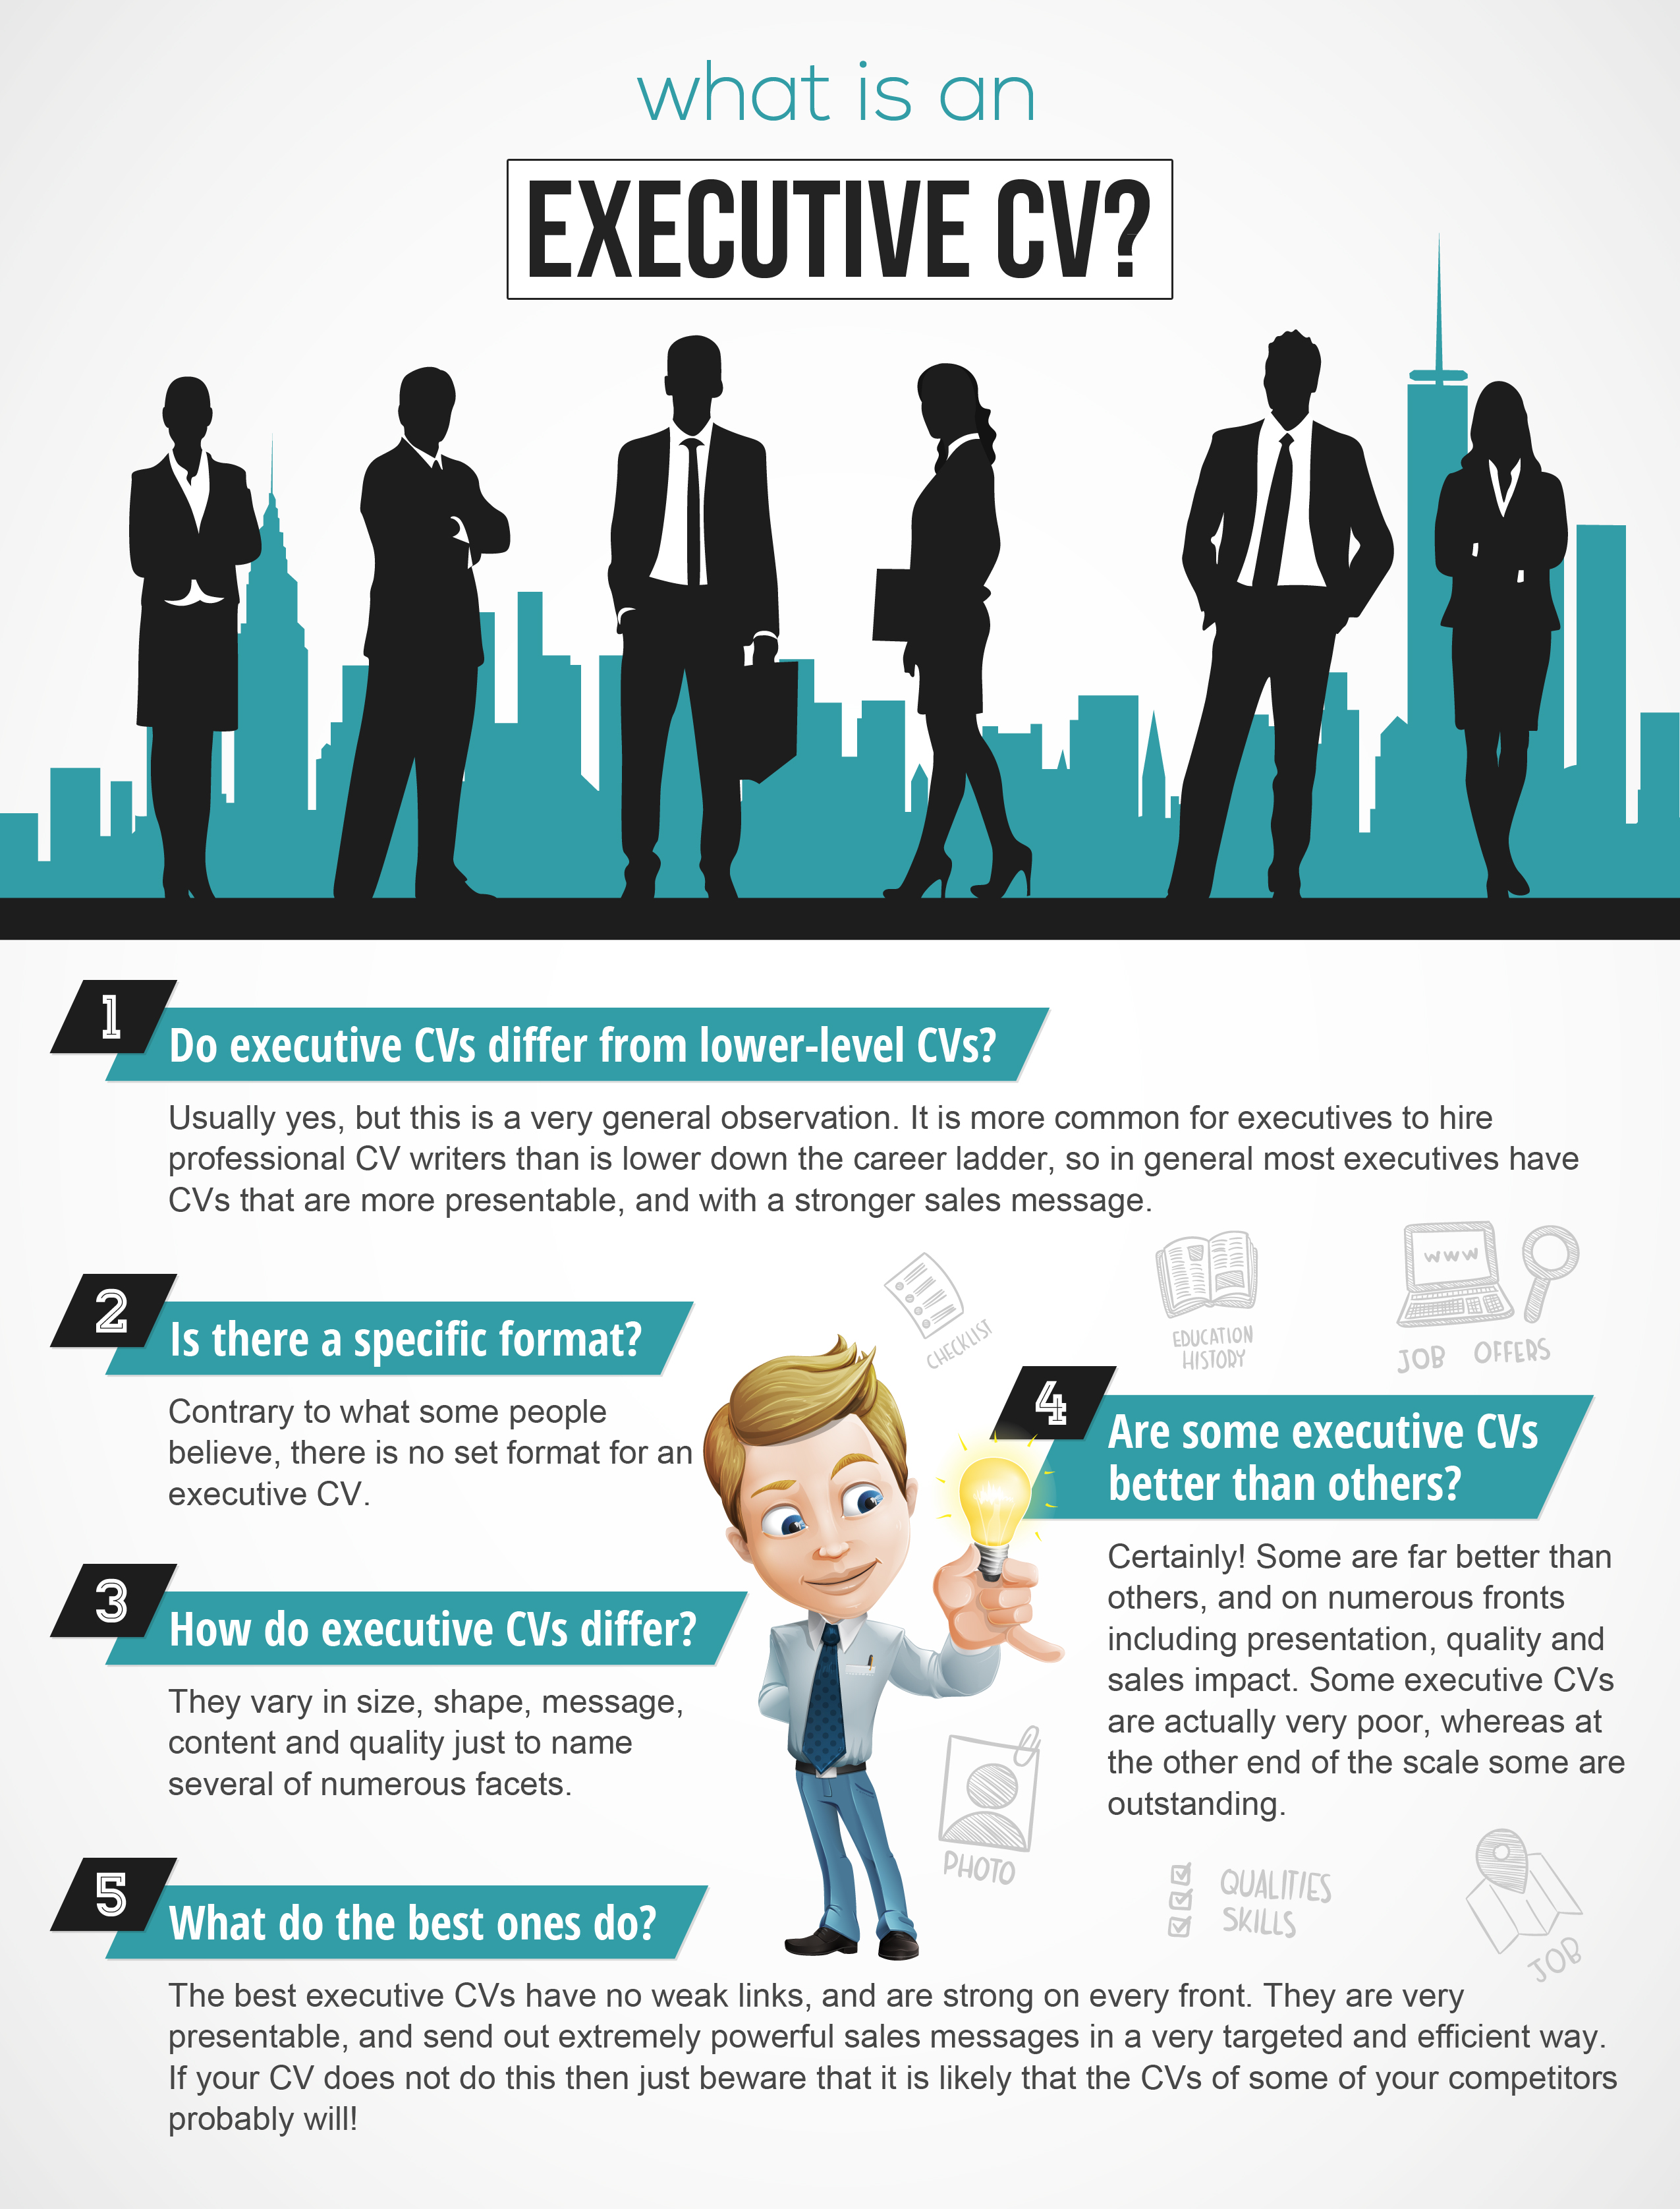 What is an executive CV